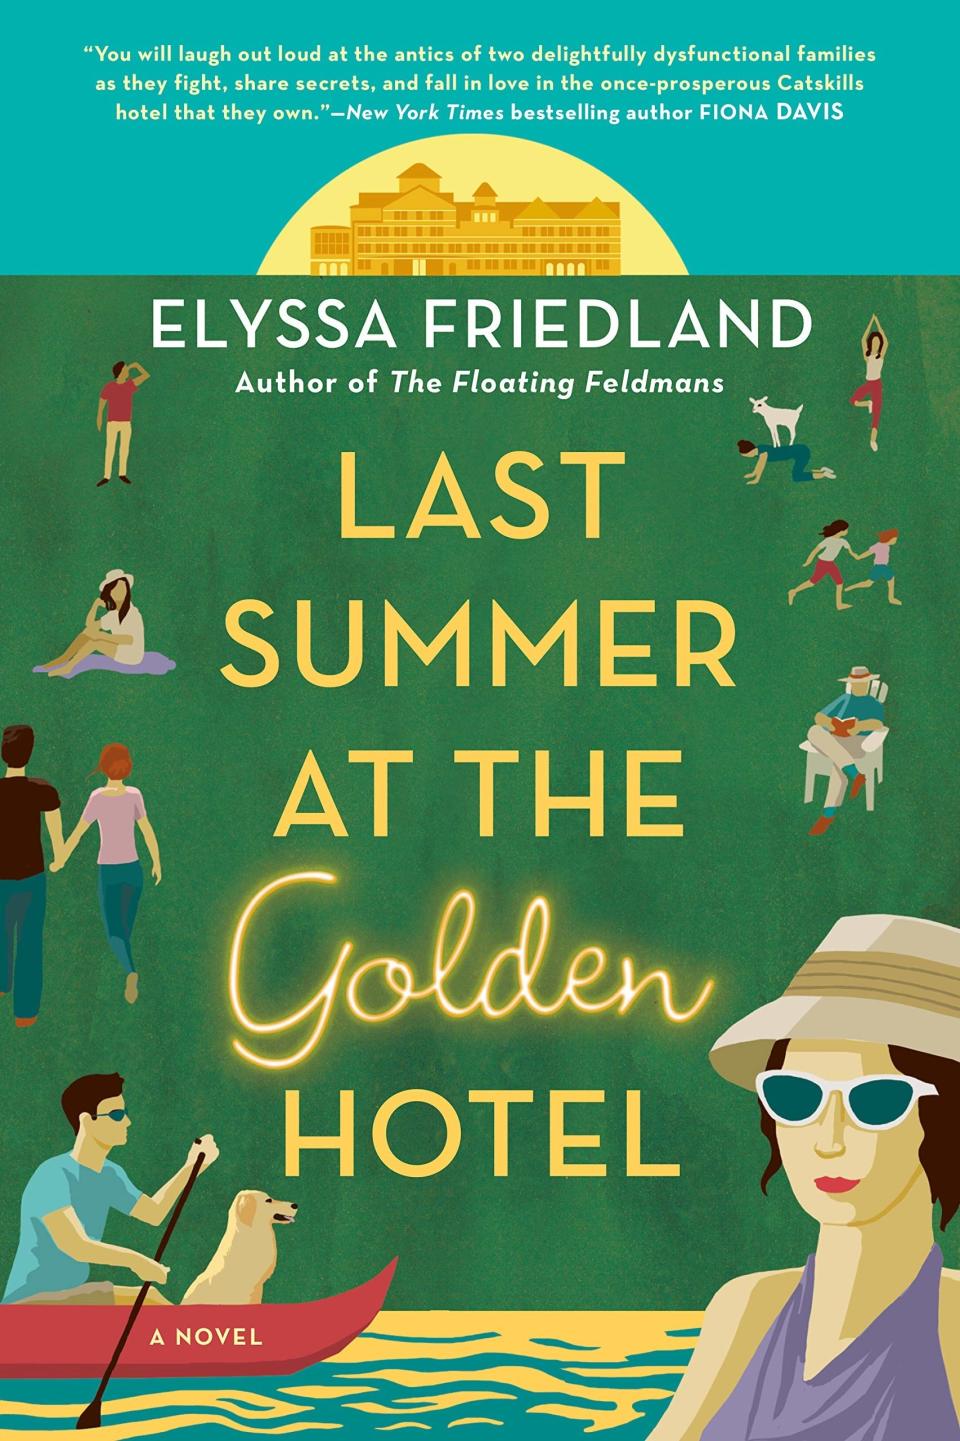 An illustrated hotel in the background, green lawn with people on it. Title reads: "Last Summer at the Golden Hotel."